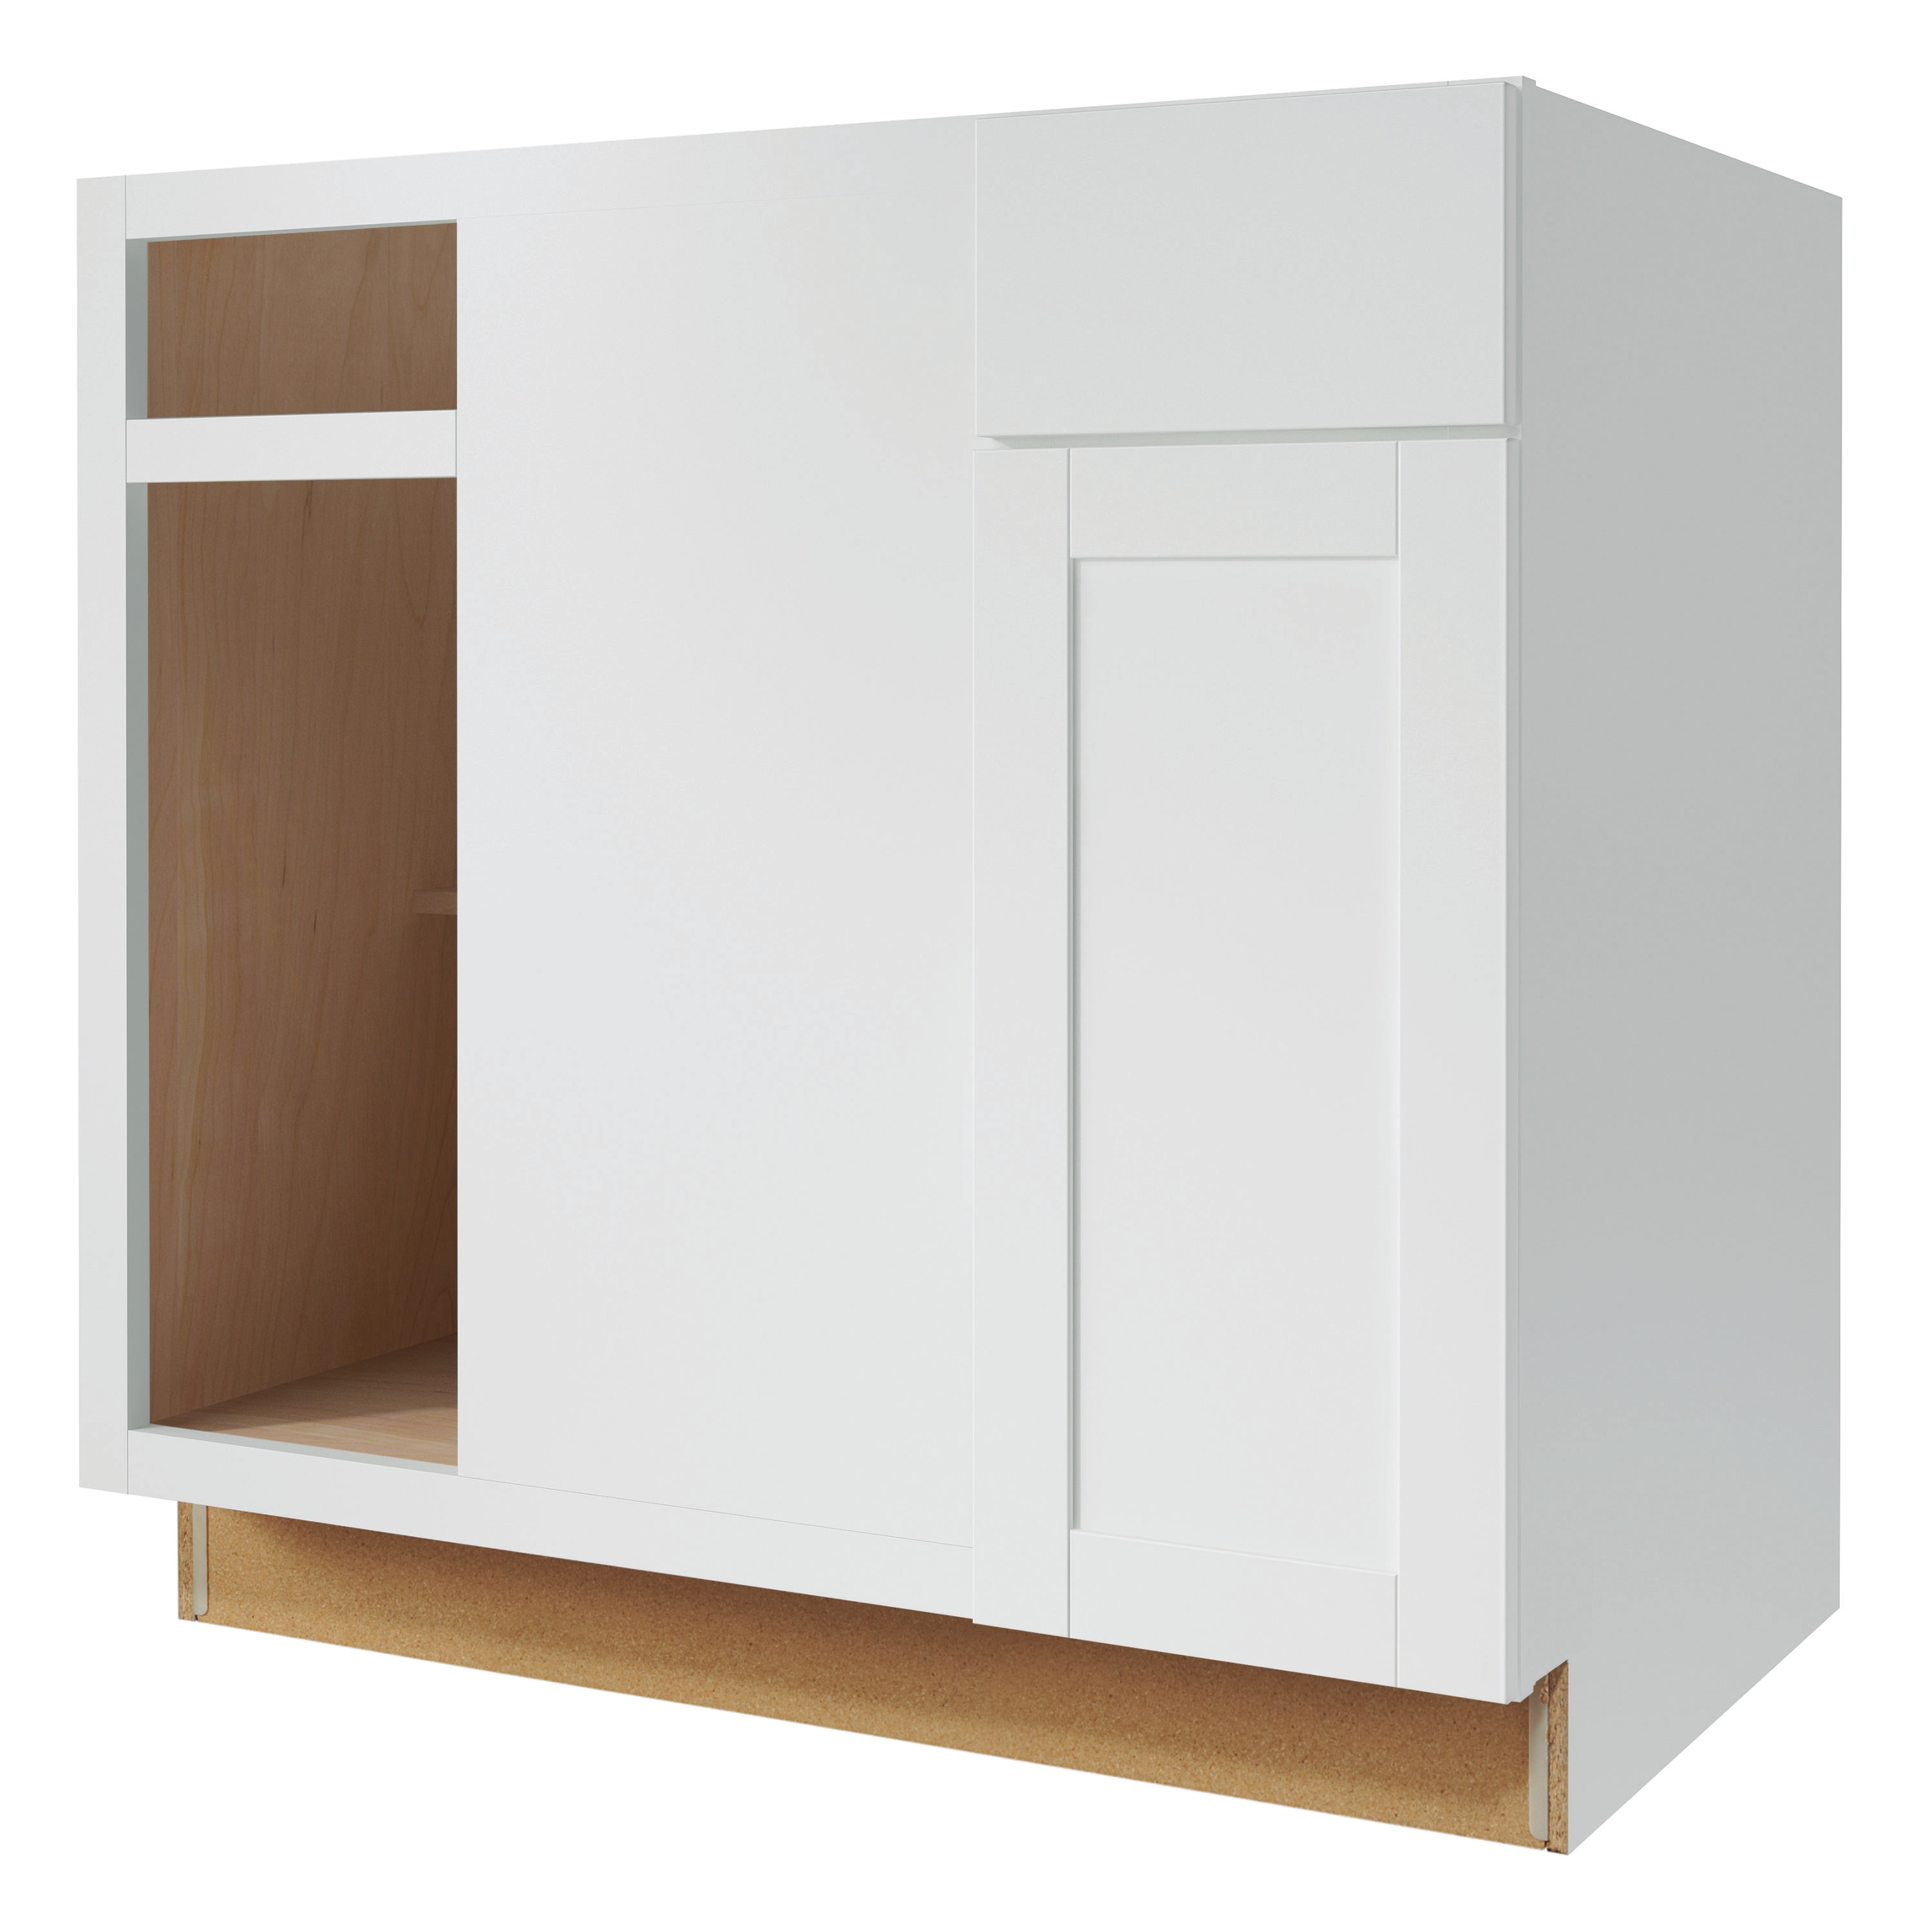 Kitchen Cabinets at Lowes.com